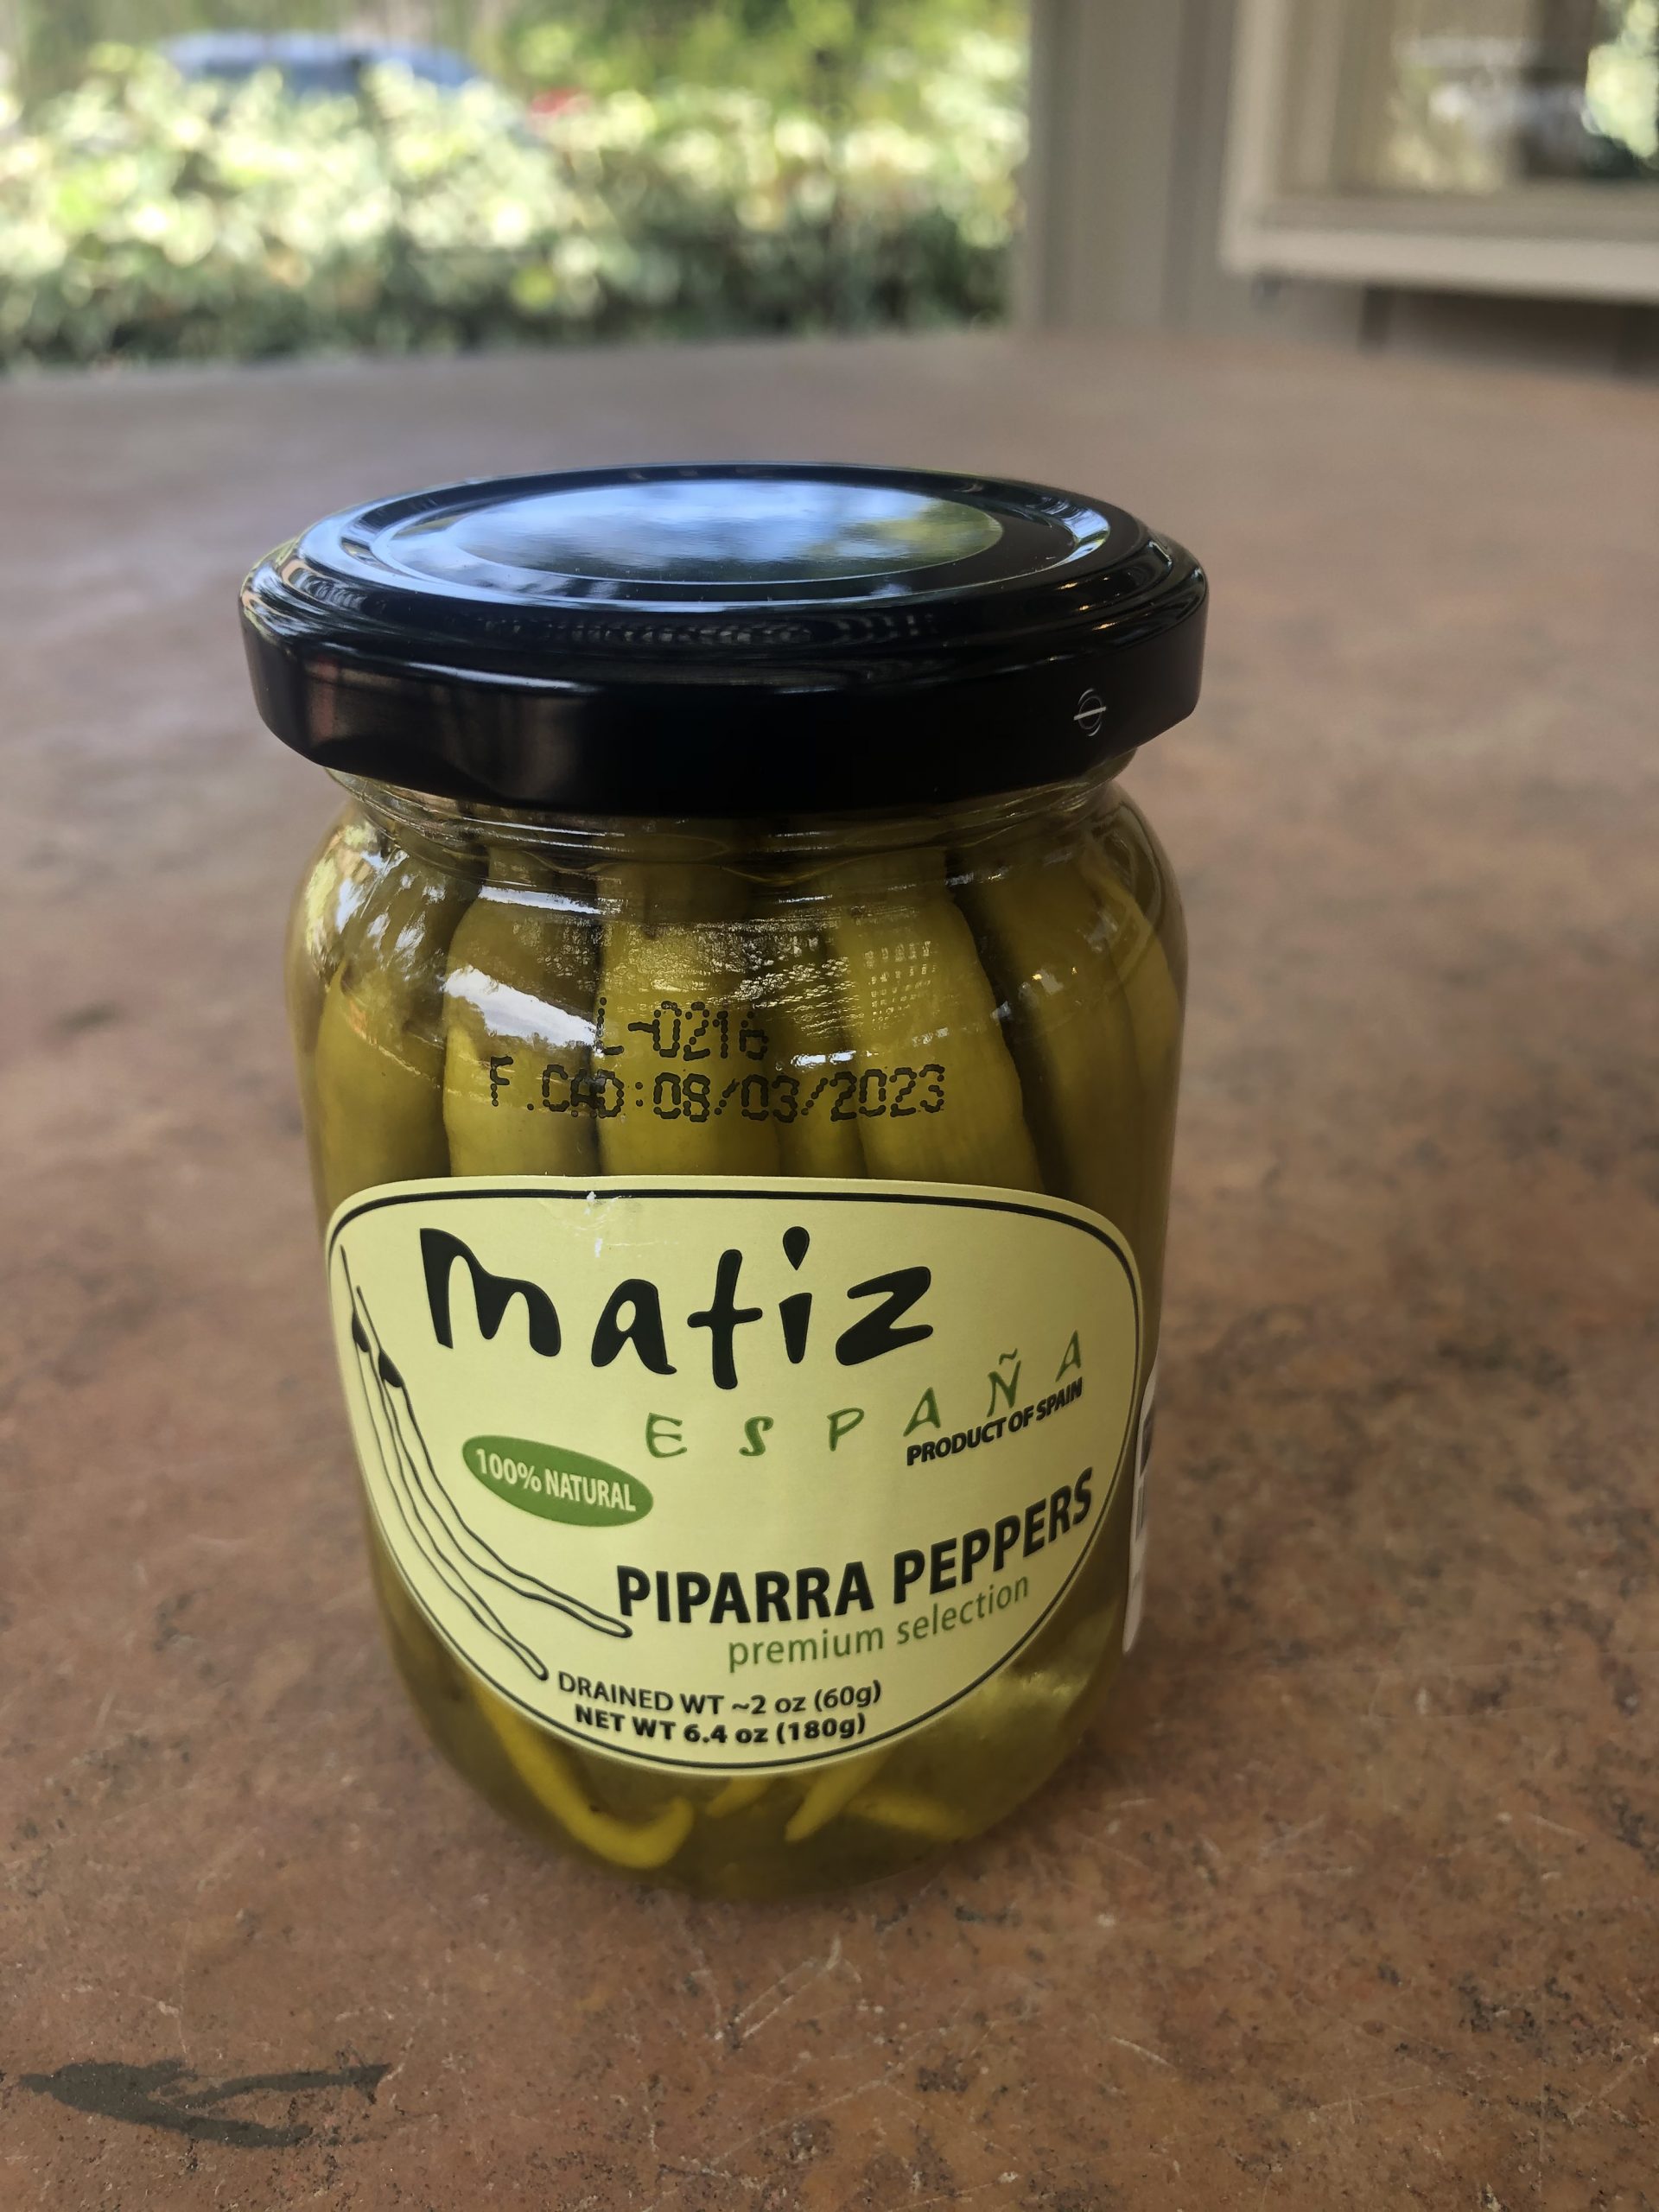 Product Image for Piparras Basque Pepper